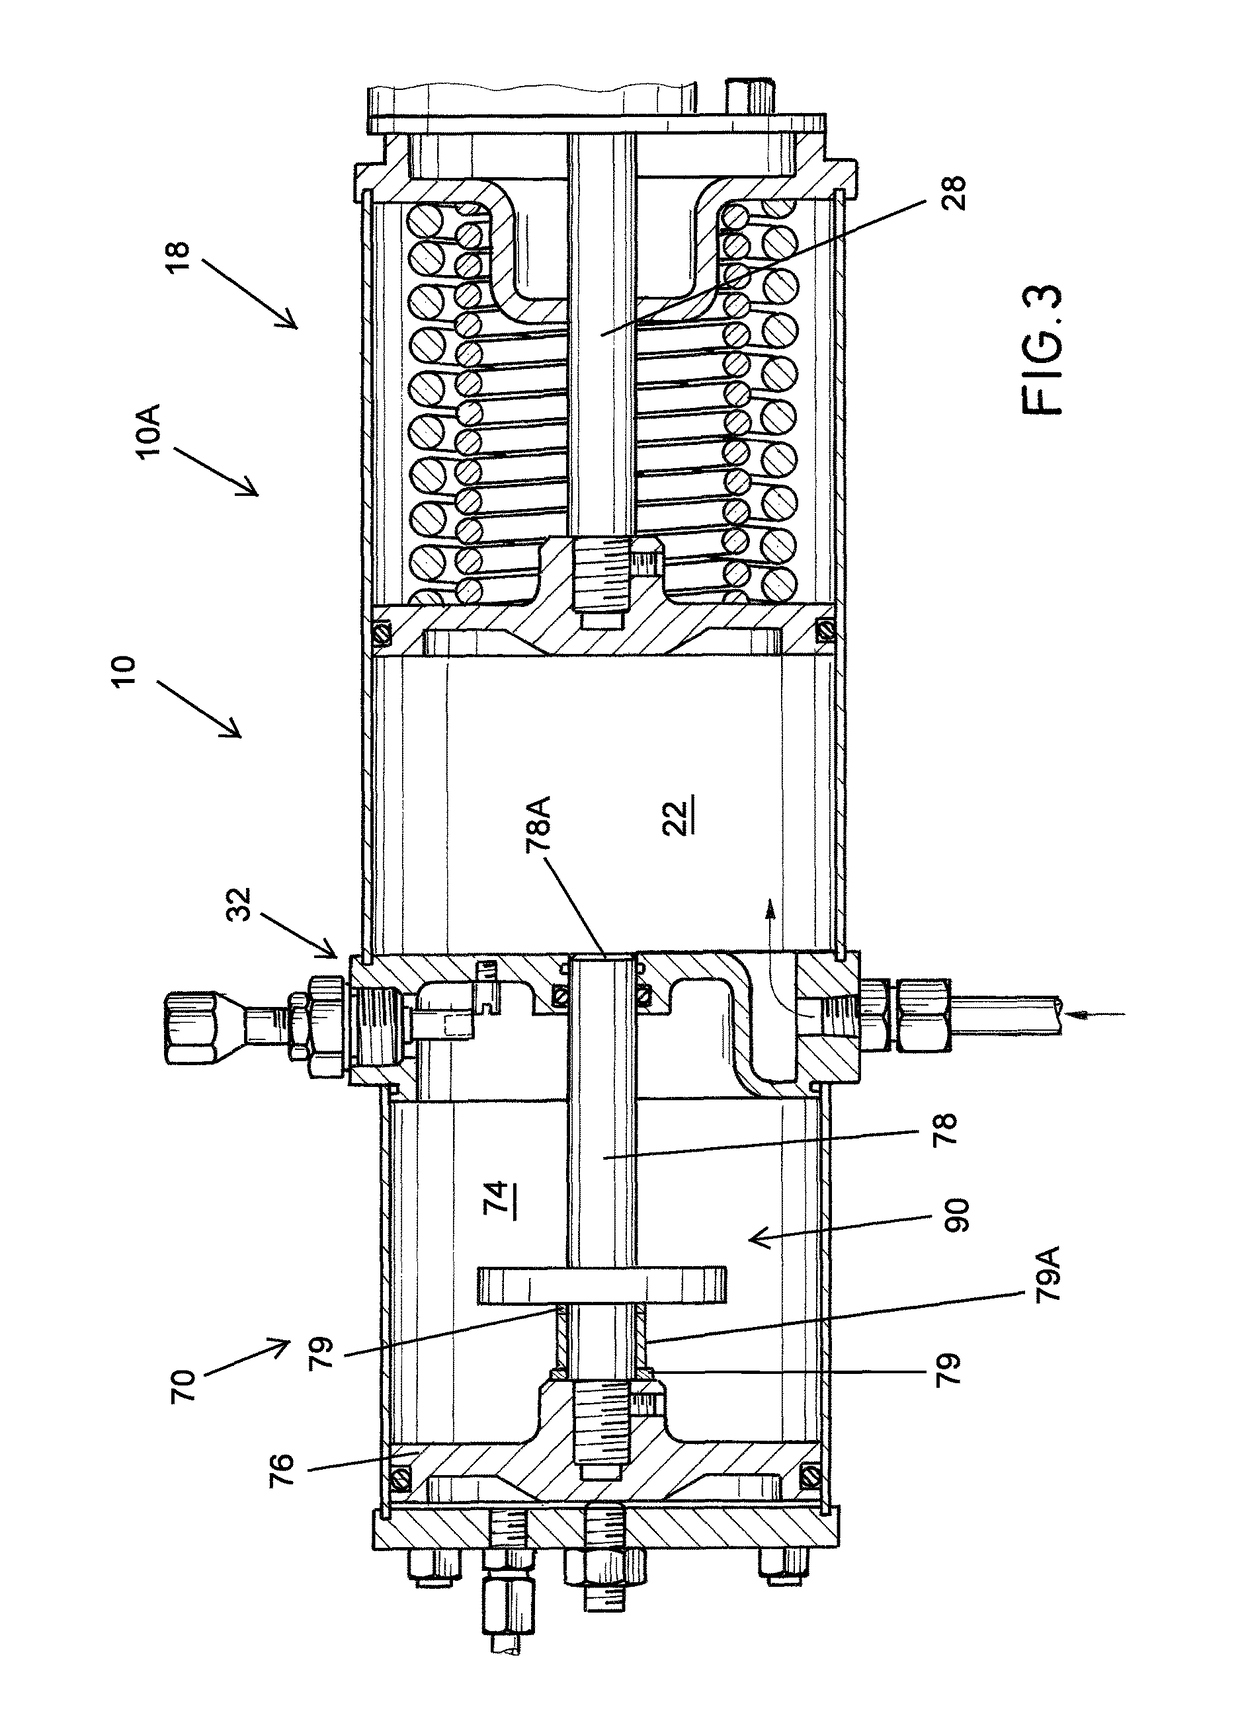 Actuator assembly for conducting partial stroke testing